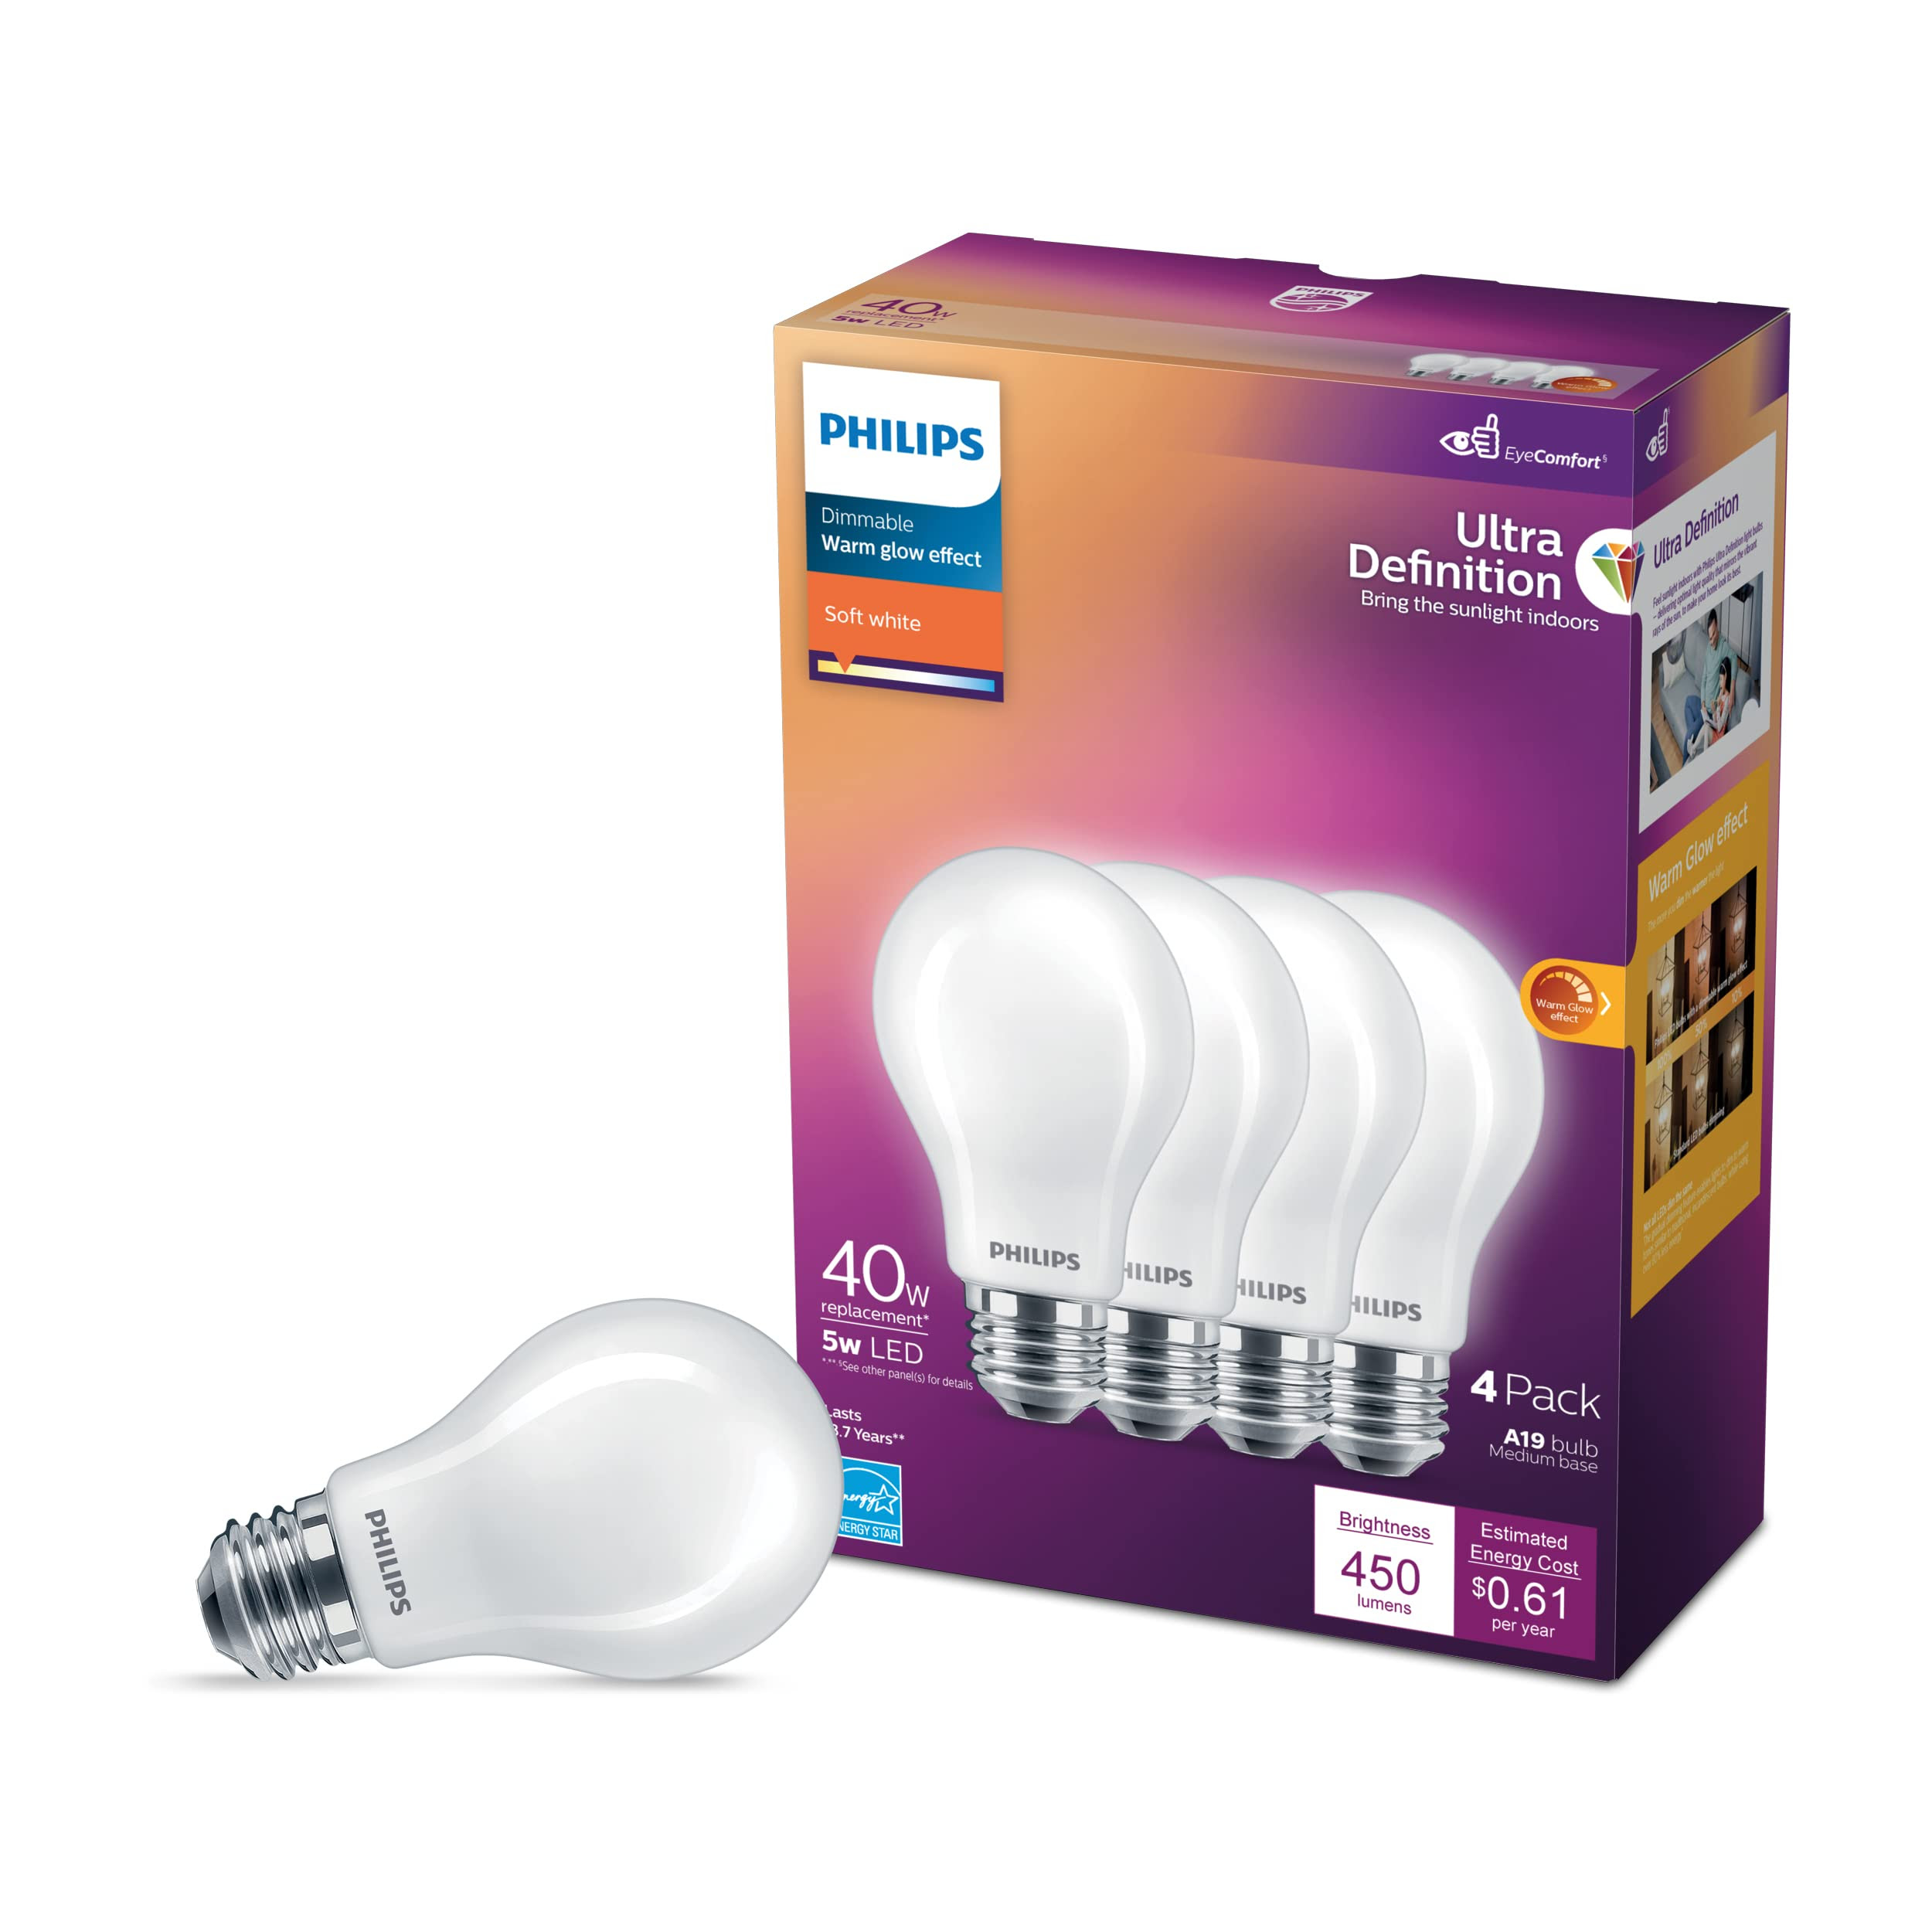 Philips LED Ultra Definition Dimmable A19 Light Bulbs